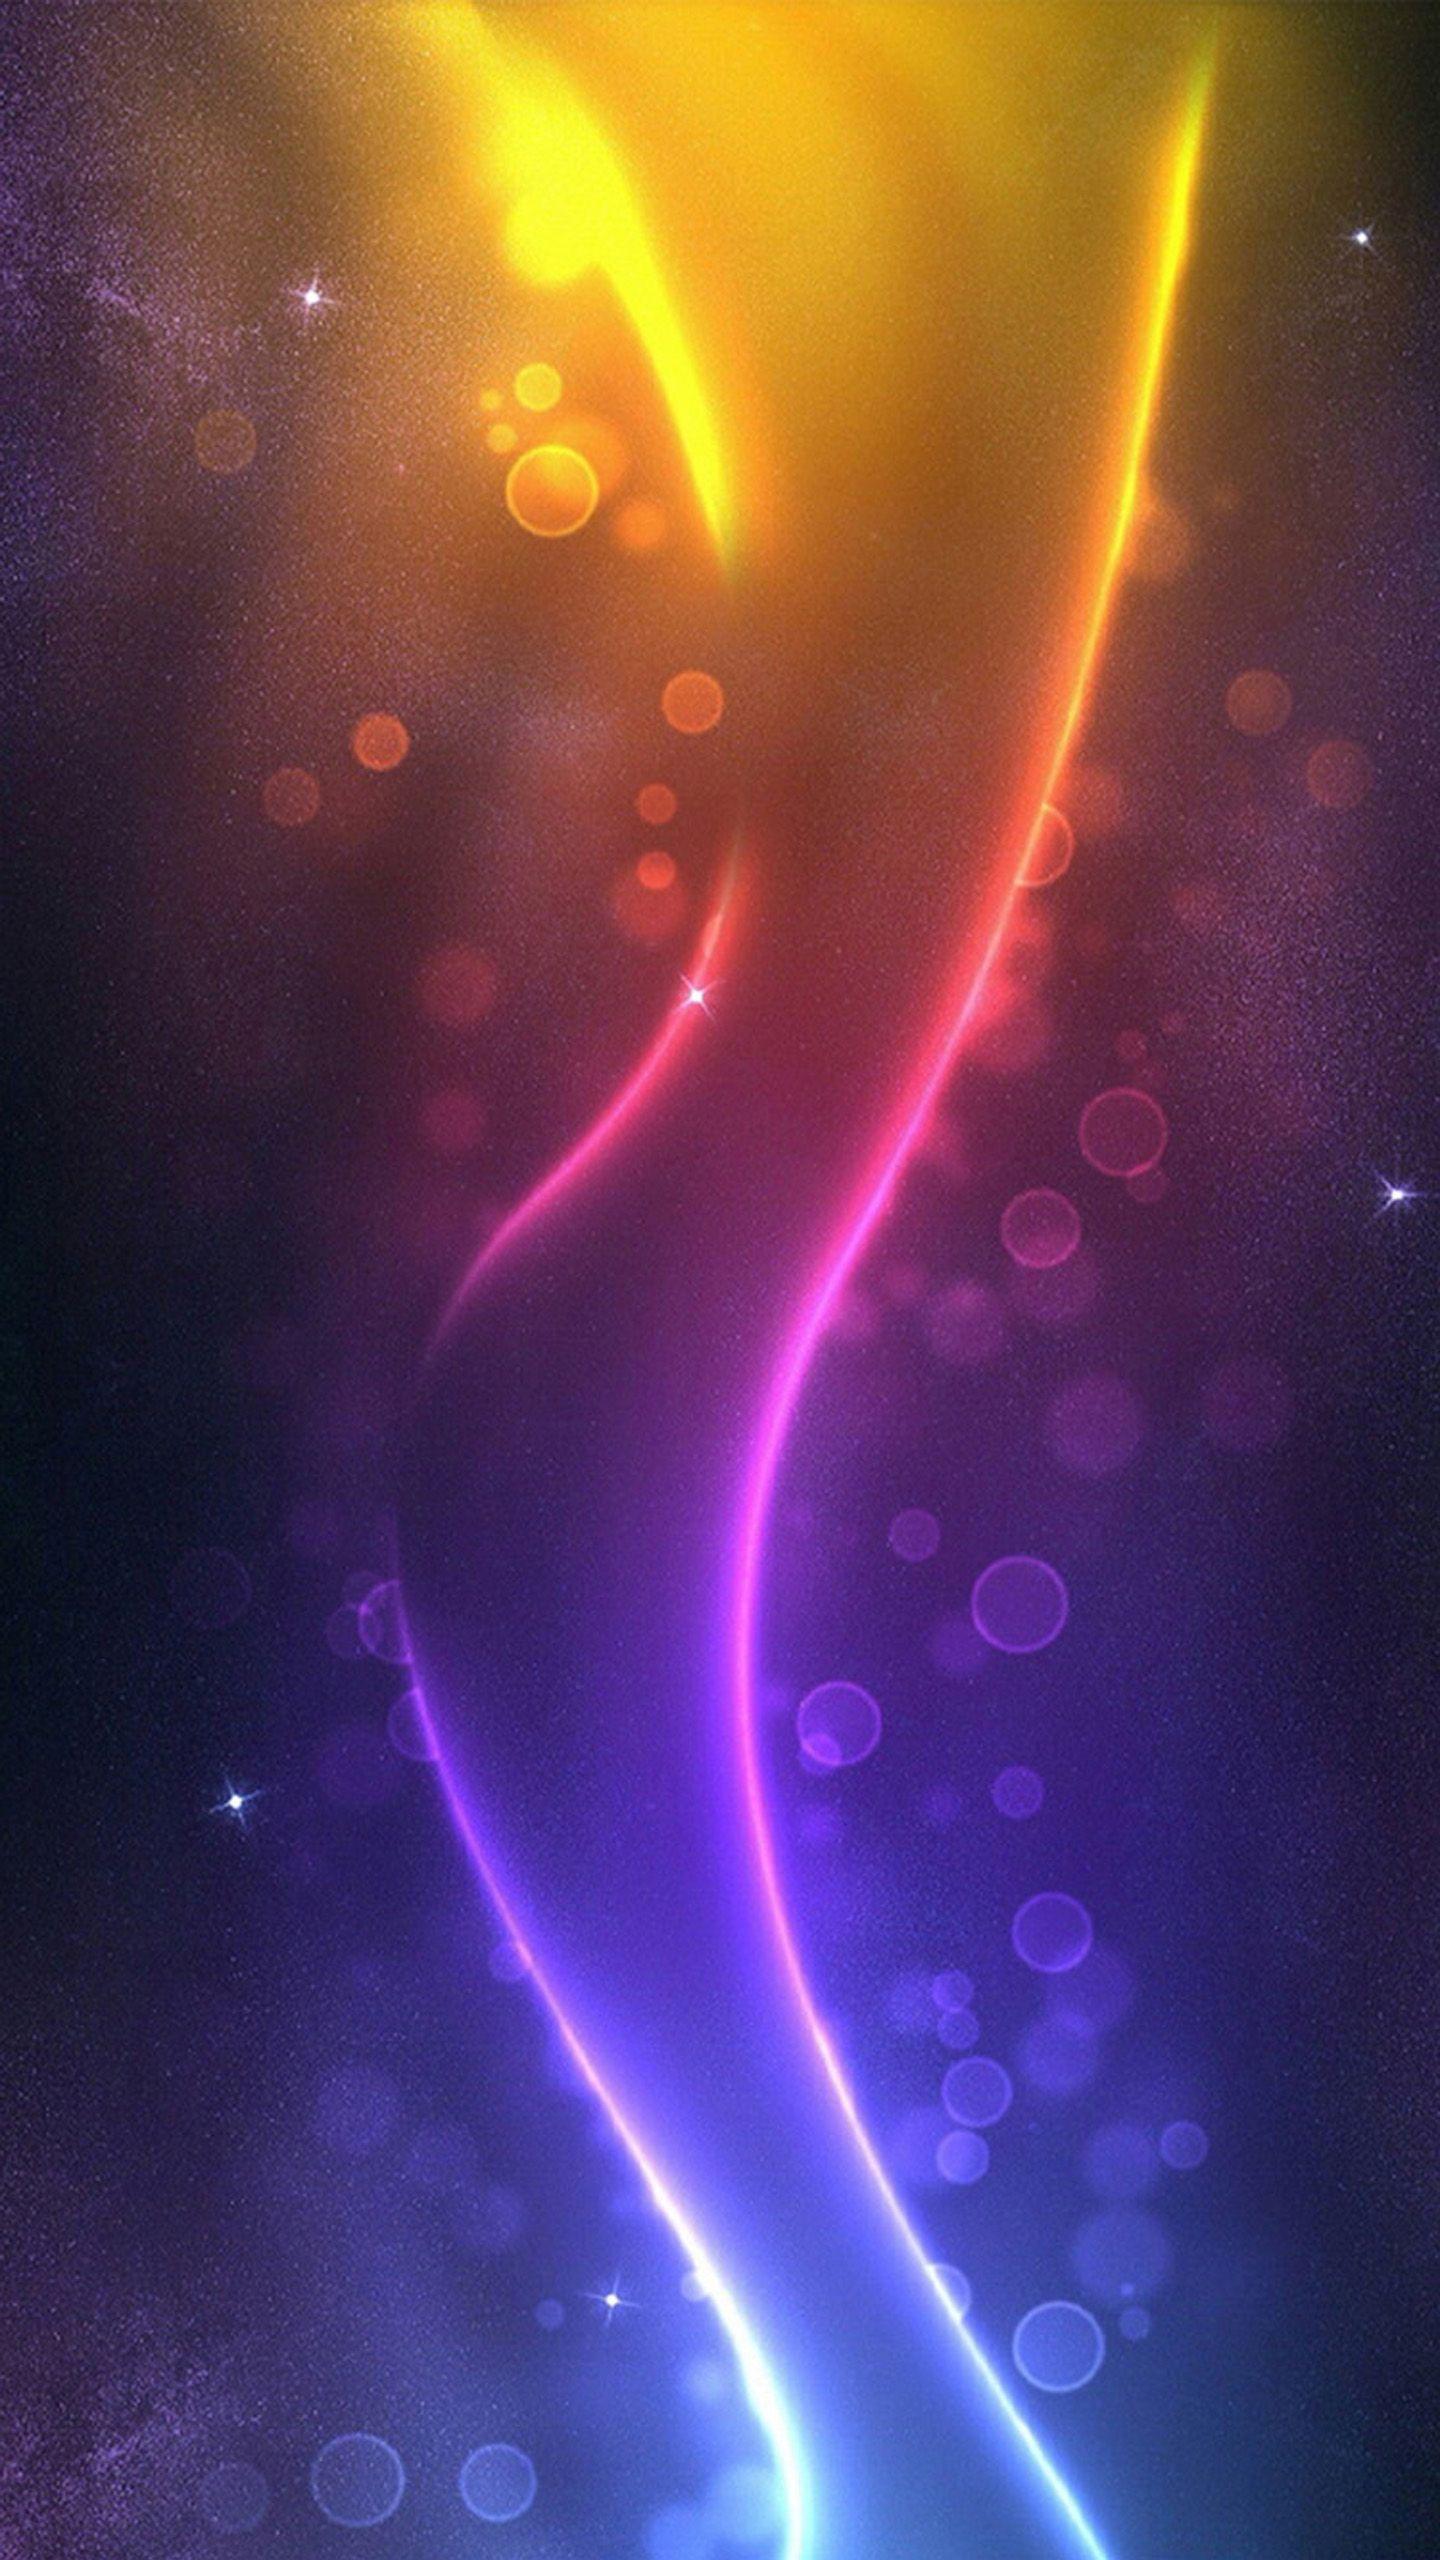 Note 4 Wallpapers - Wallpaper Cave